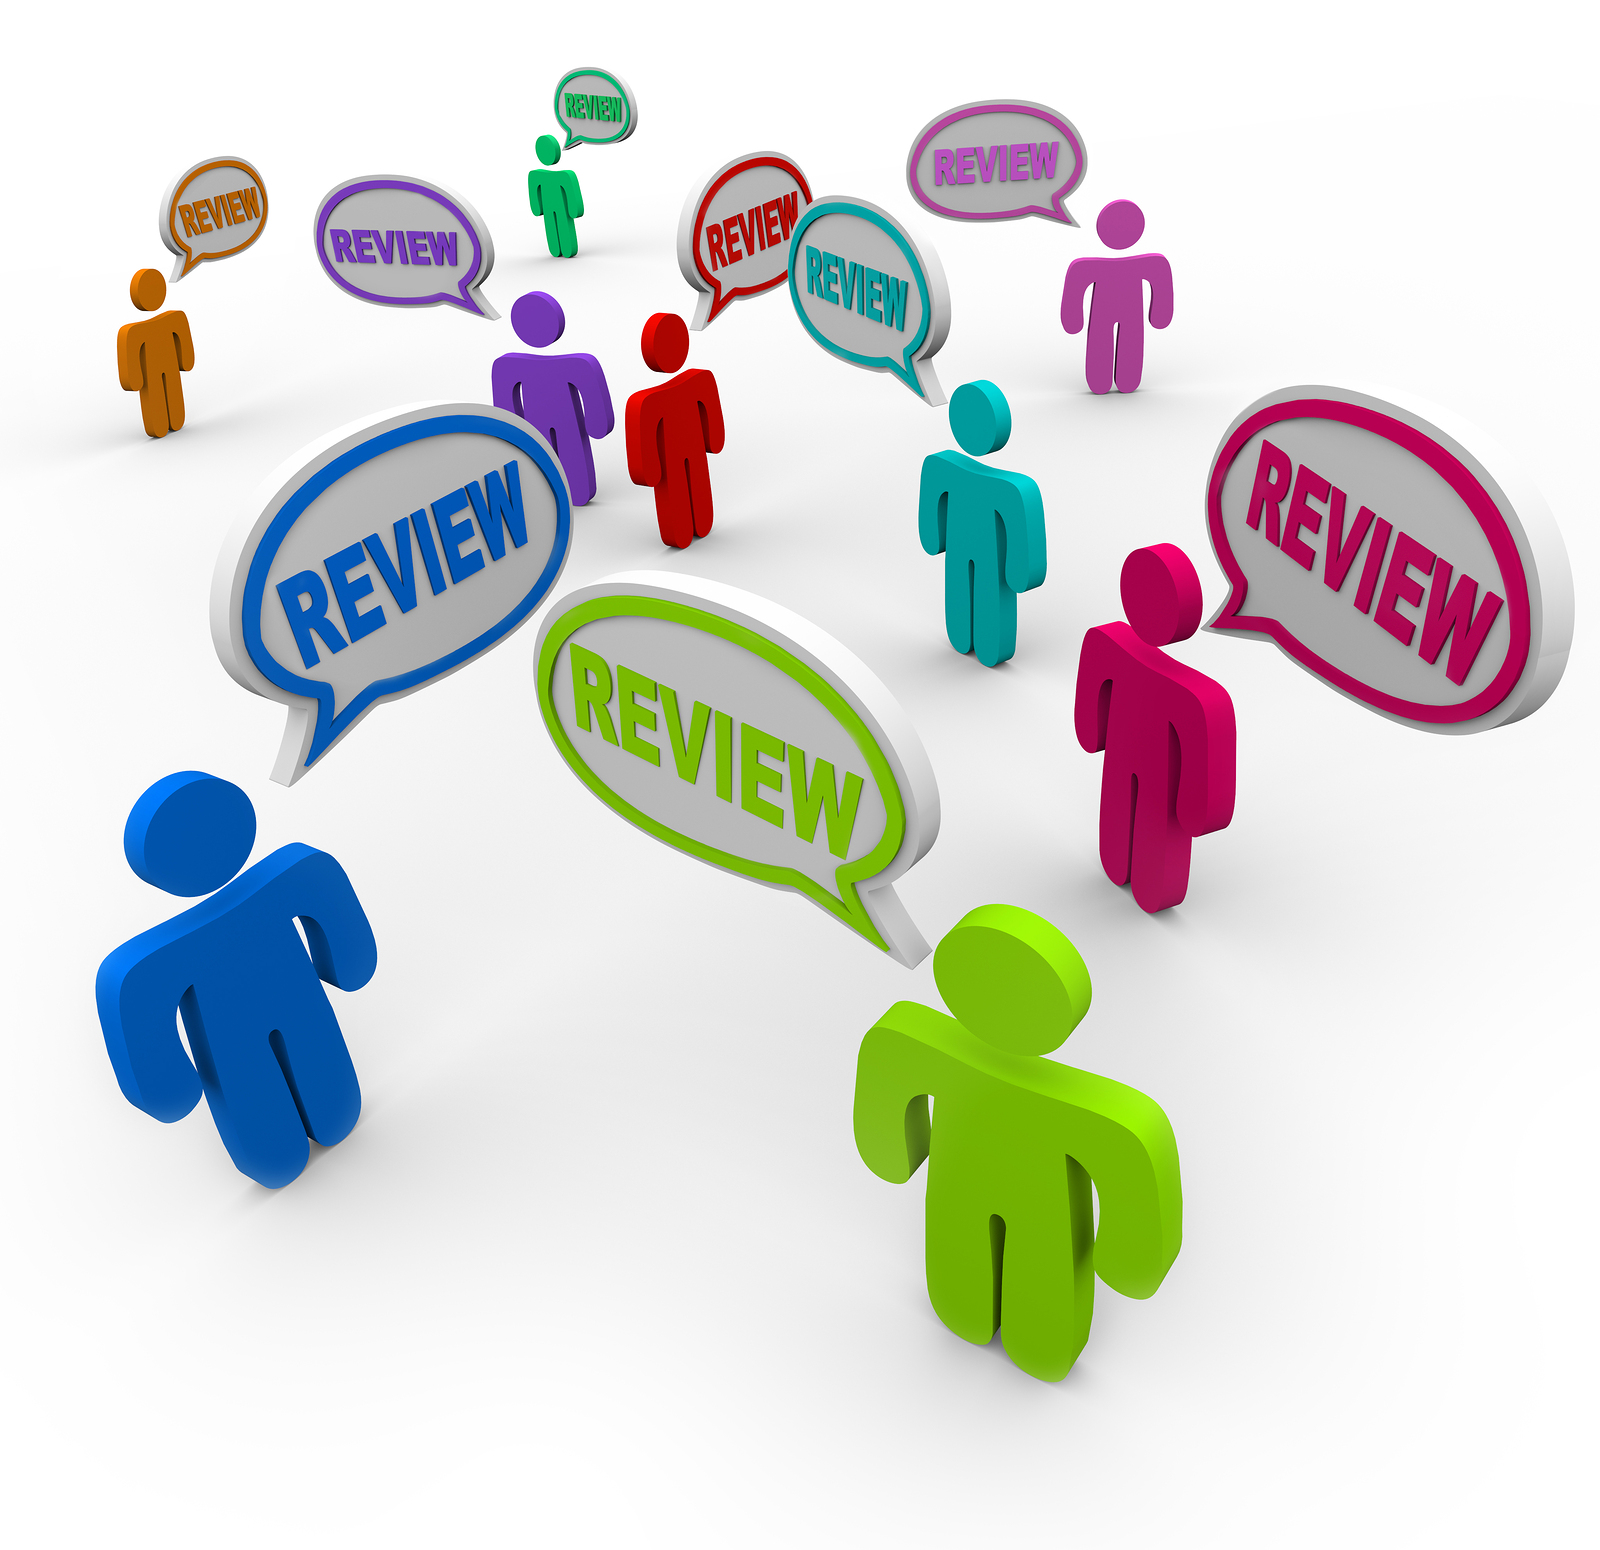 Does Your Business Need Online Reviews?